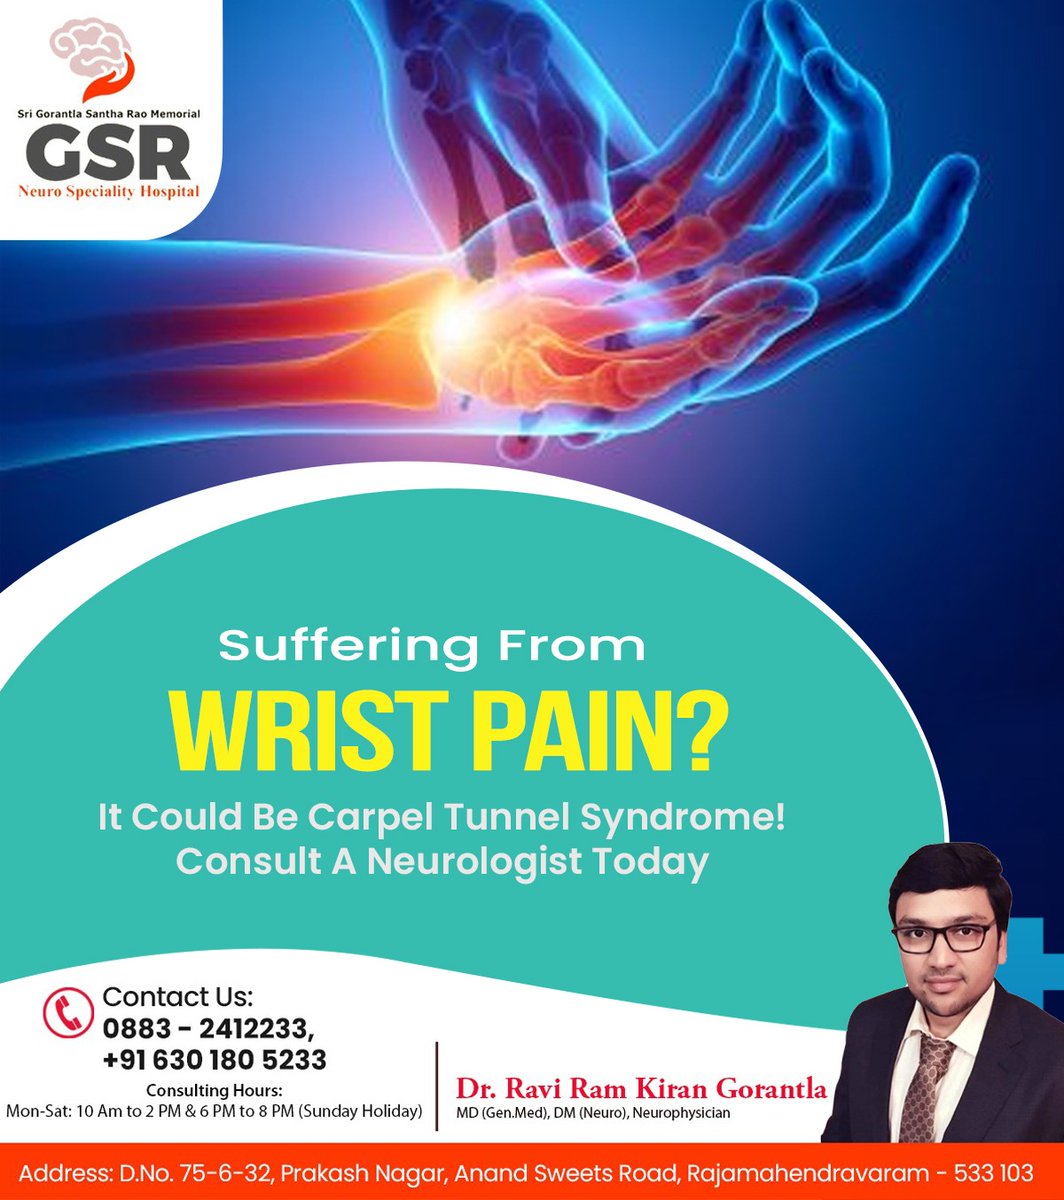 Find relief from wrist pain with specialized care at GSR Neuro Speciality Hospital—regain comfort and mobility.

#GSRNeuroHospital #WristPainRelief #NeuroSpecialist #OrthopedicCare #PainManagement #HealthWellness #ExpertCare #OrthopedicExperts #HandHealth #MedicalSpecialists